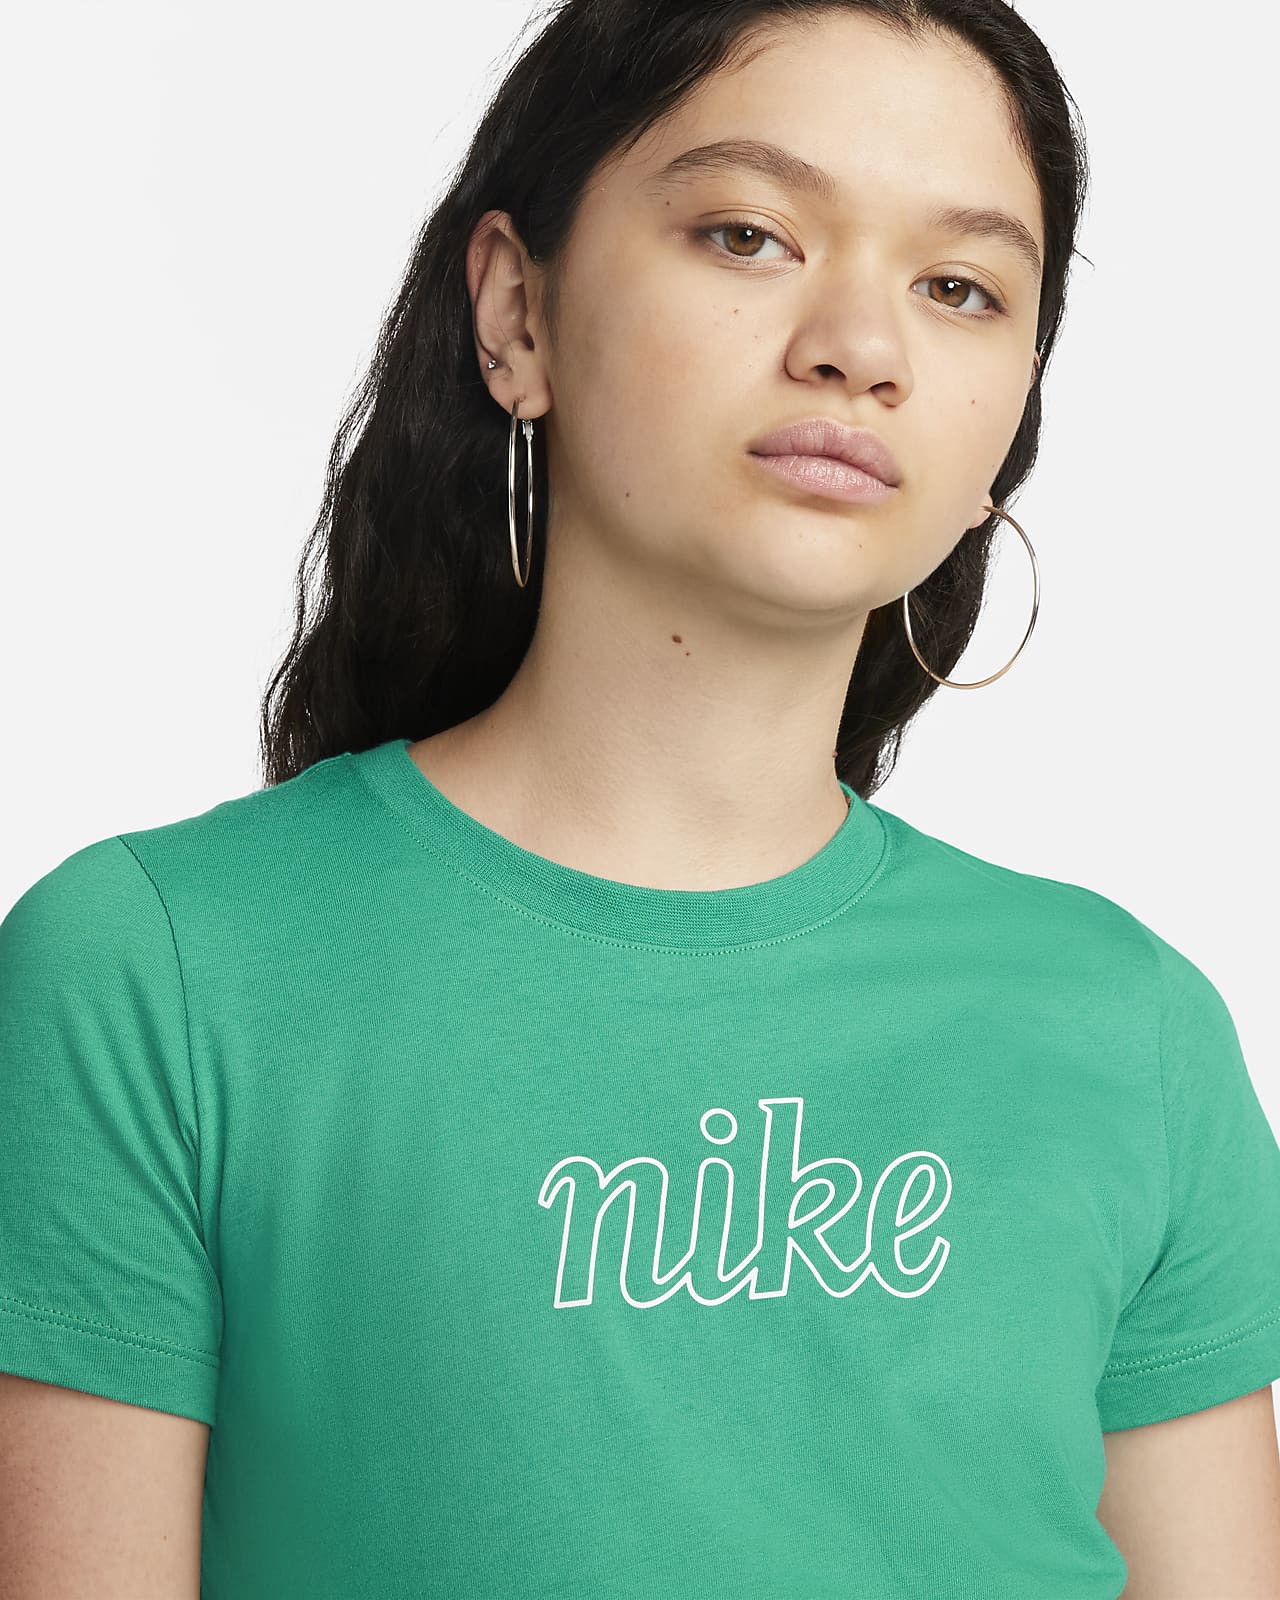 Nike Icon Clash. Find Women's Clothes from Nike Icon Clash